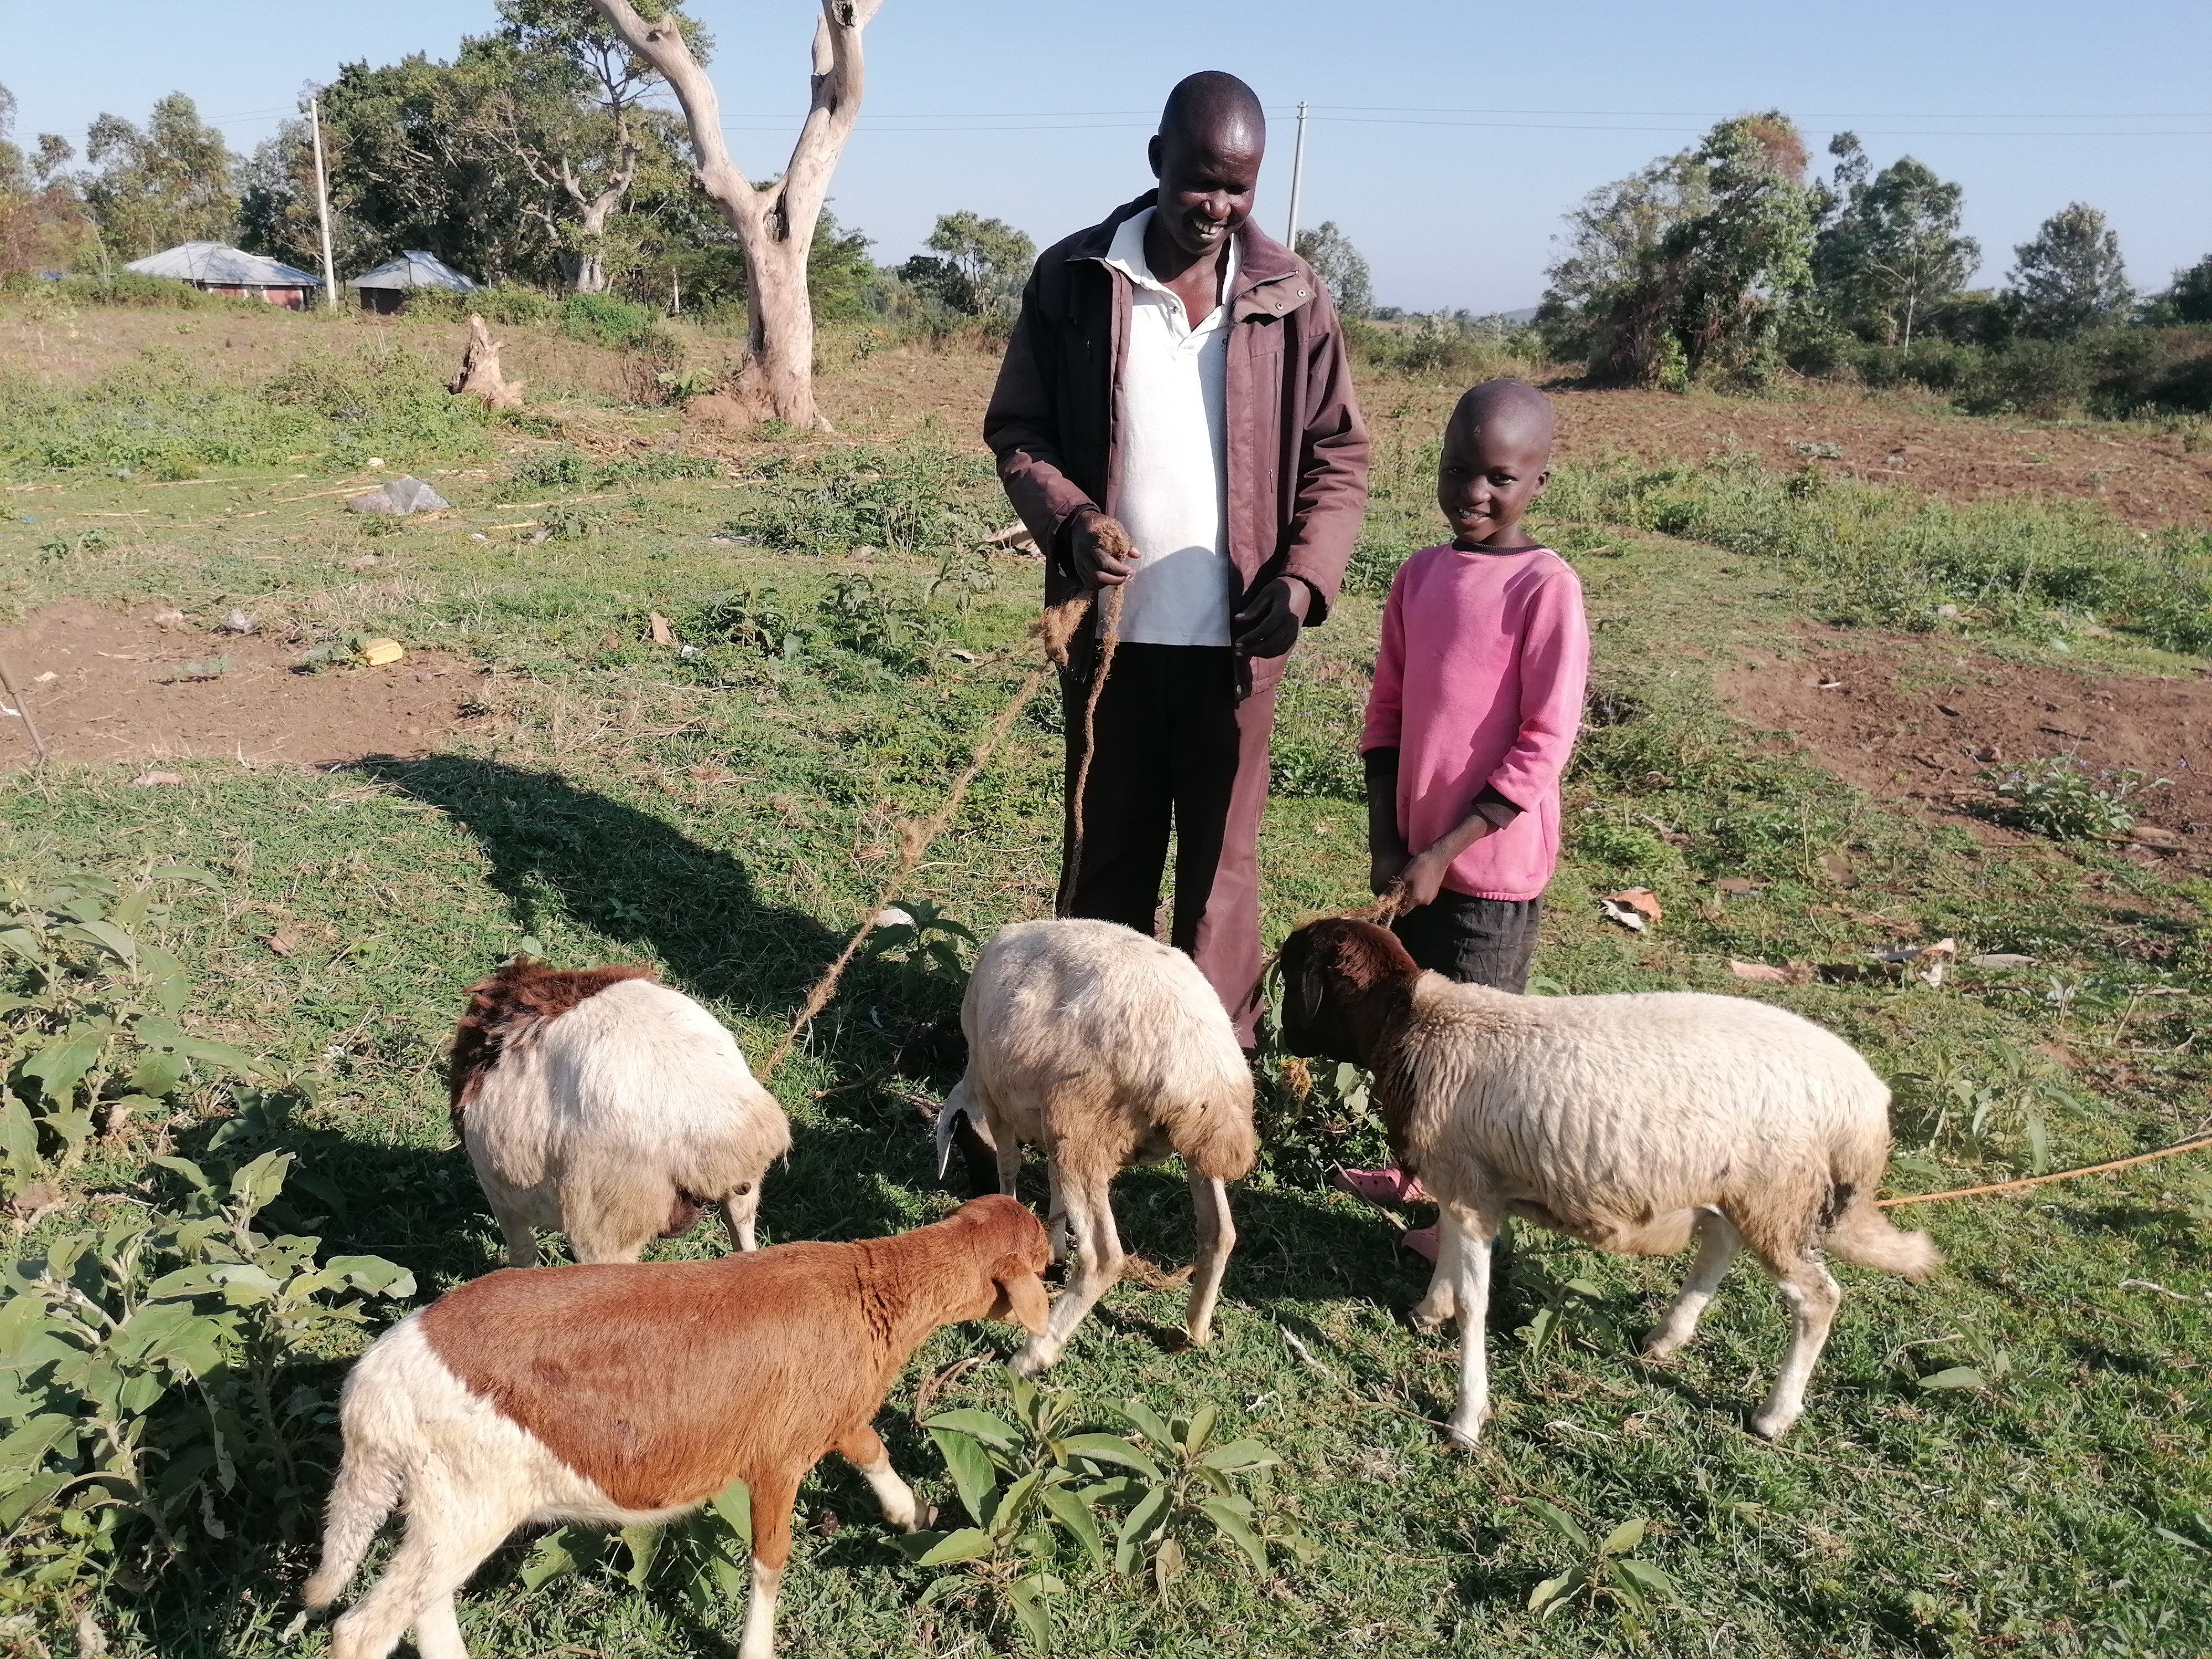 The Ochieng family has made enough money selling eggs that they were able to purchase four sheep. Now, Elly’s father, Eberson Onyango Otieno, says he would like to sell the sheep and purchase a cow.